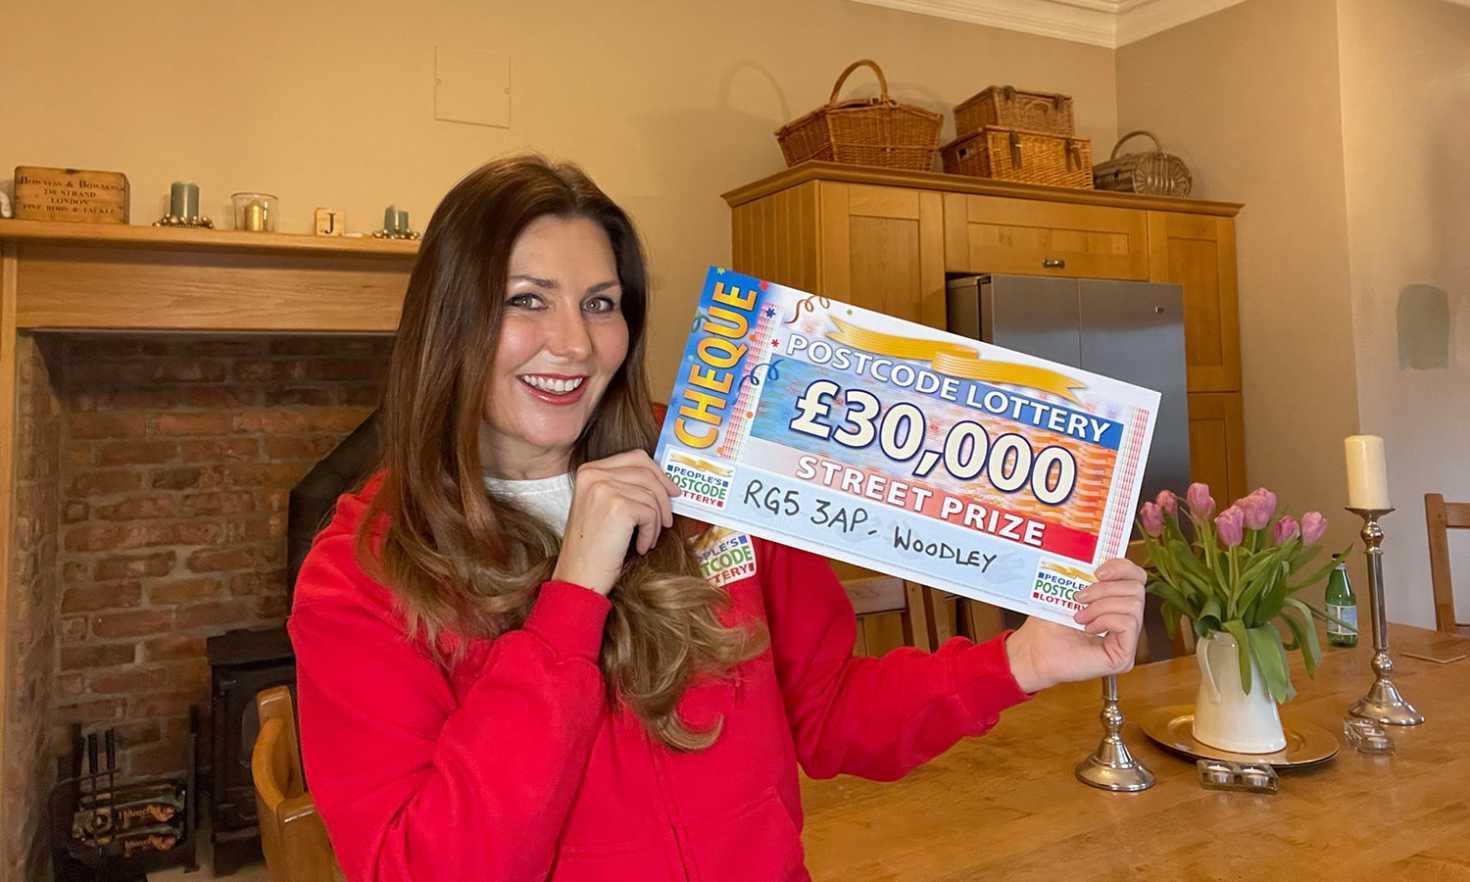 Judie has a super £30,000 cheque for each of our three winners in today's Street Prize